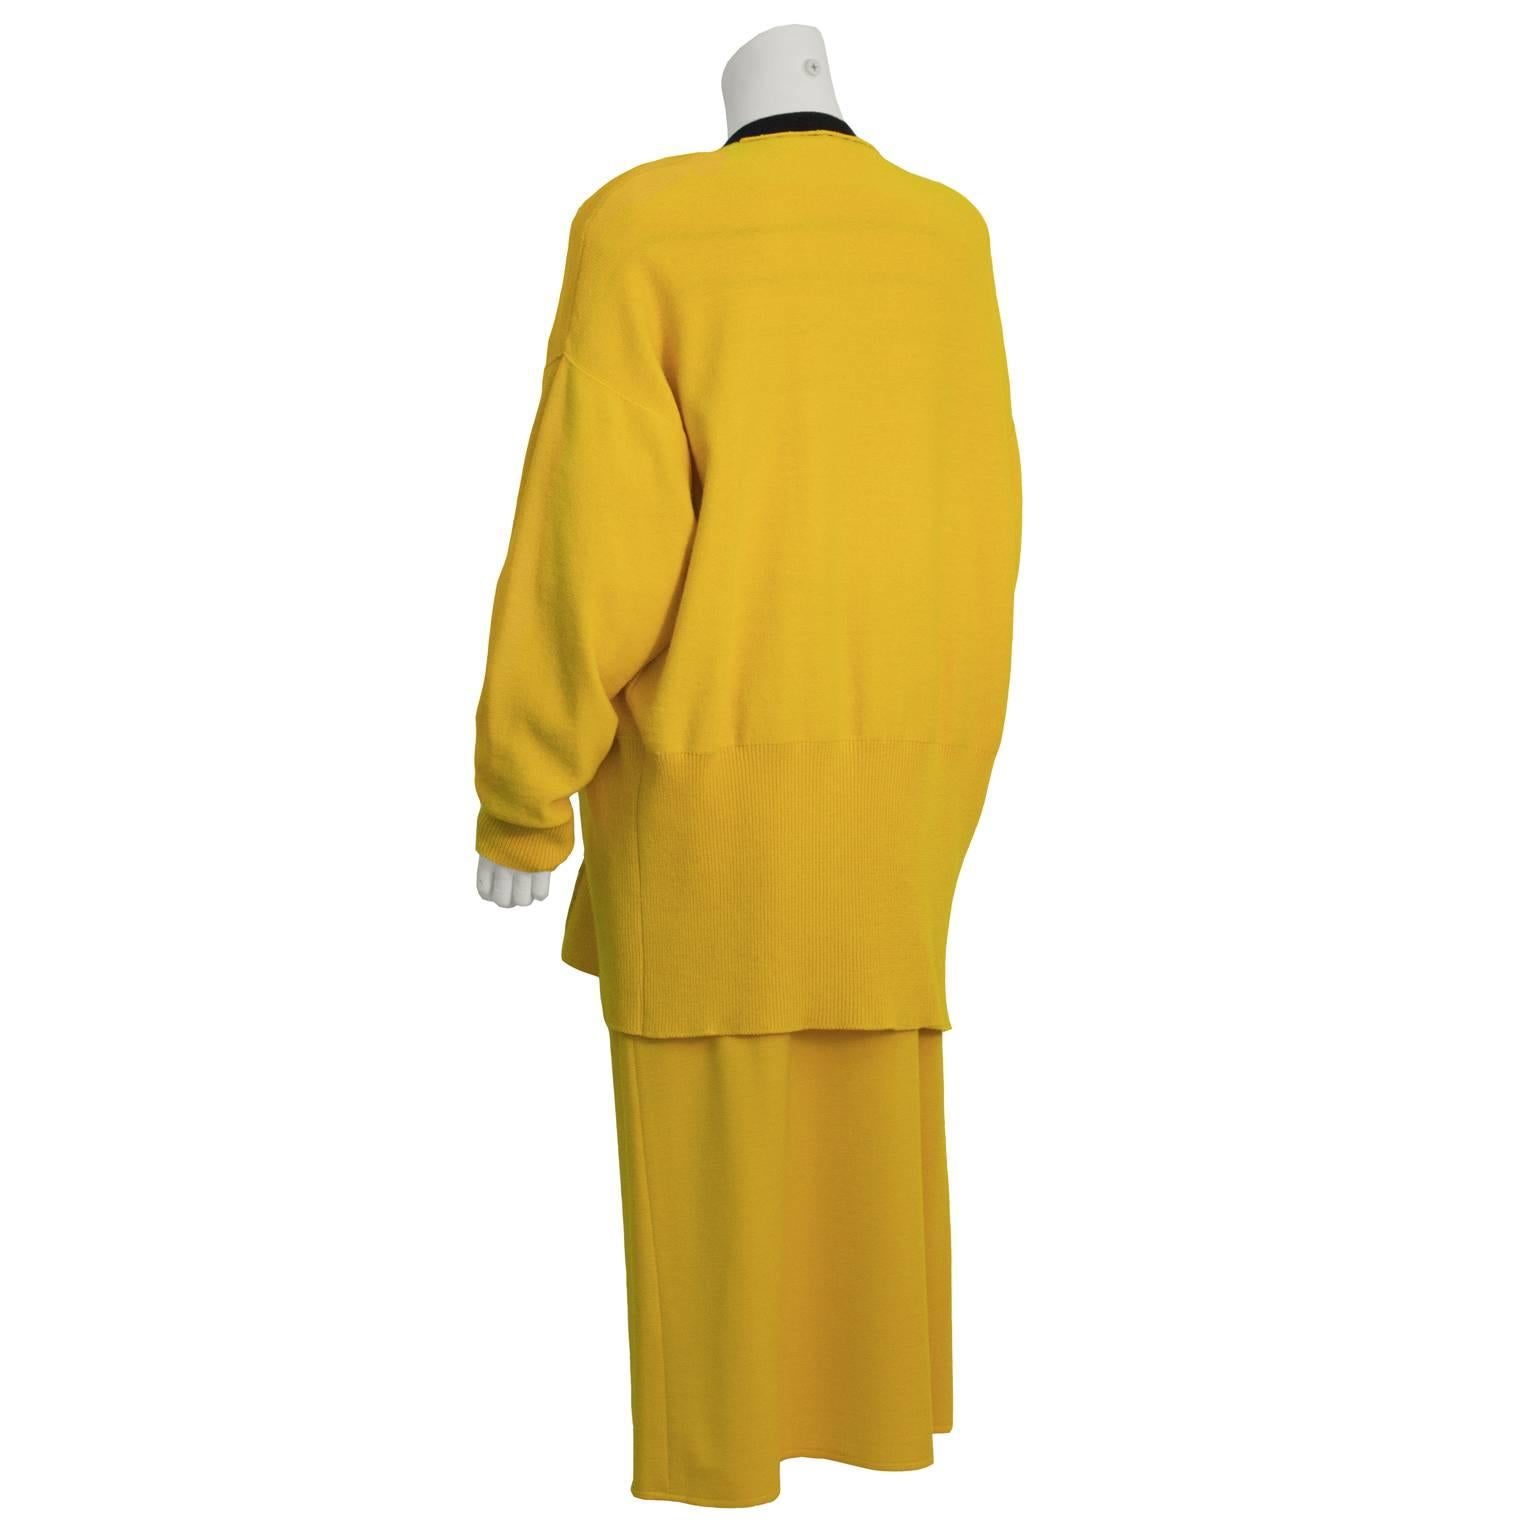 This brilliant three piece Sonia Rykiel ensemble from the 1980's features a pullover sweater, cardigan and mid-length skirt, all in a fabulous vibrant yellow. Pullover has horizontal stripes in black, red, white, and green. Wool knit cardigan